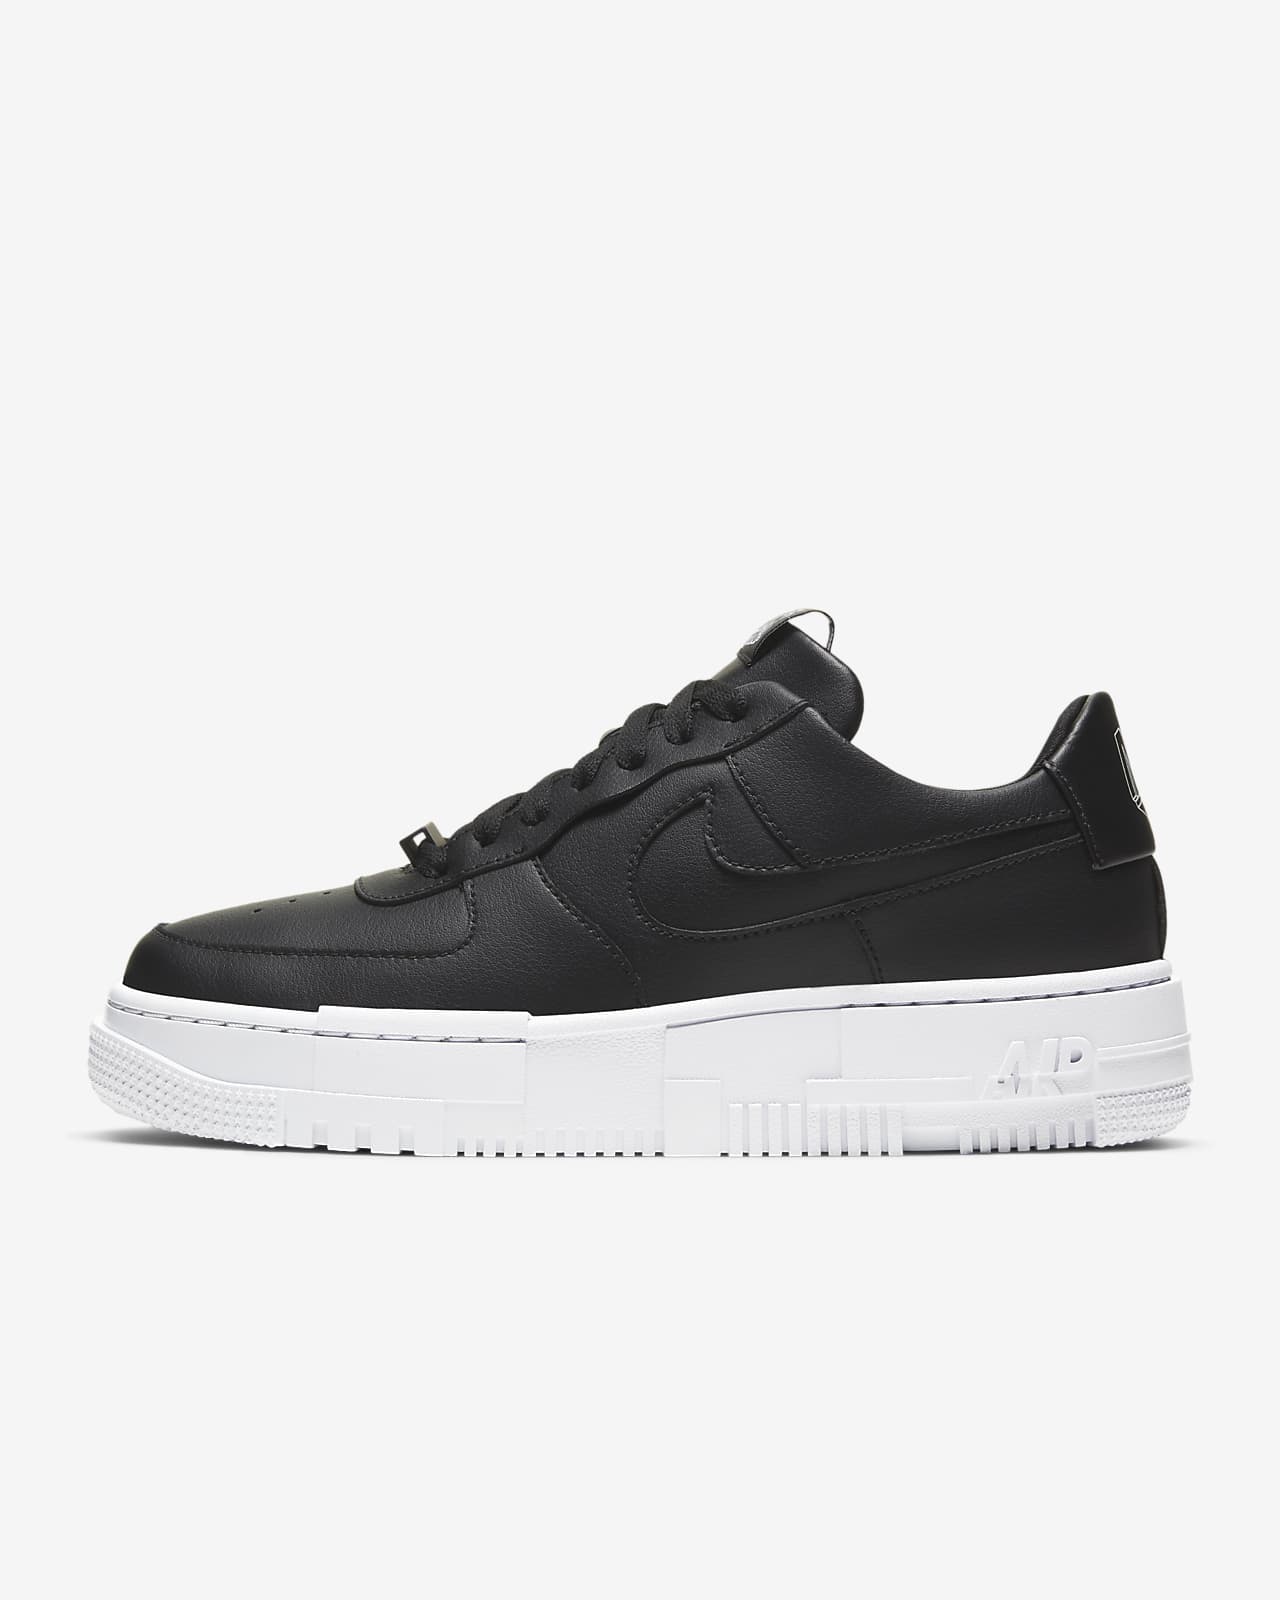 air force 1 donna argento